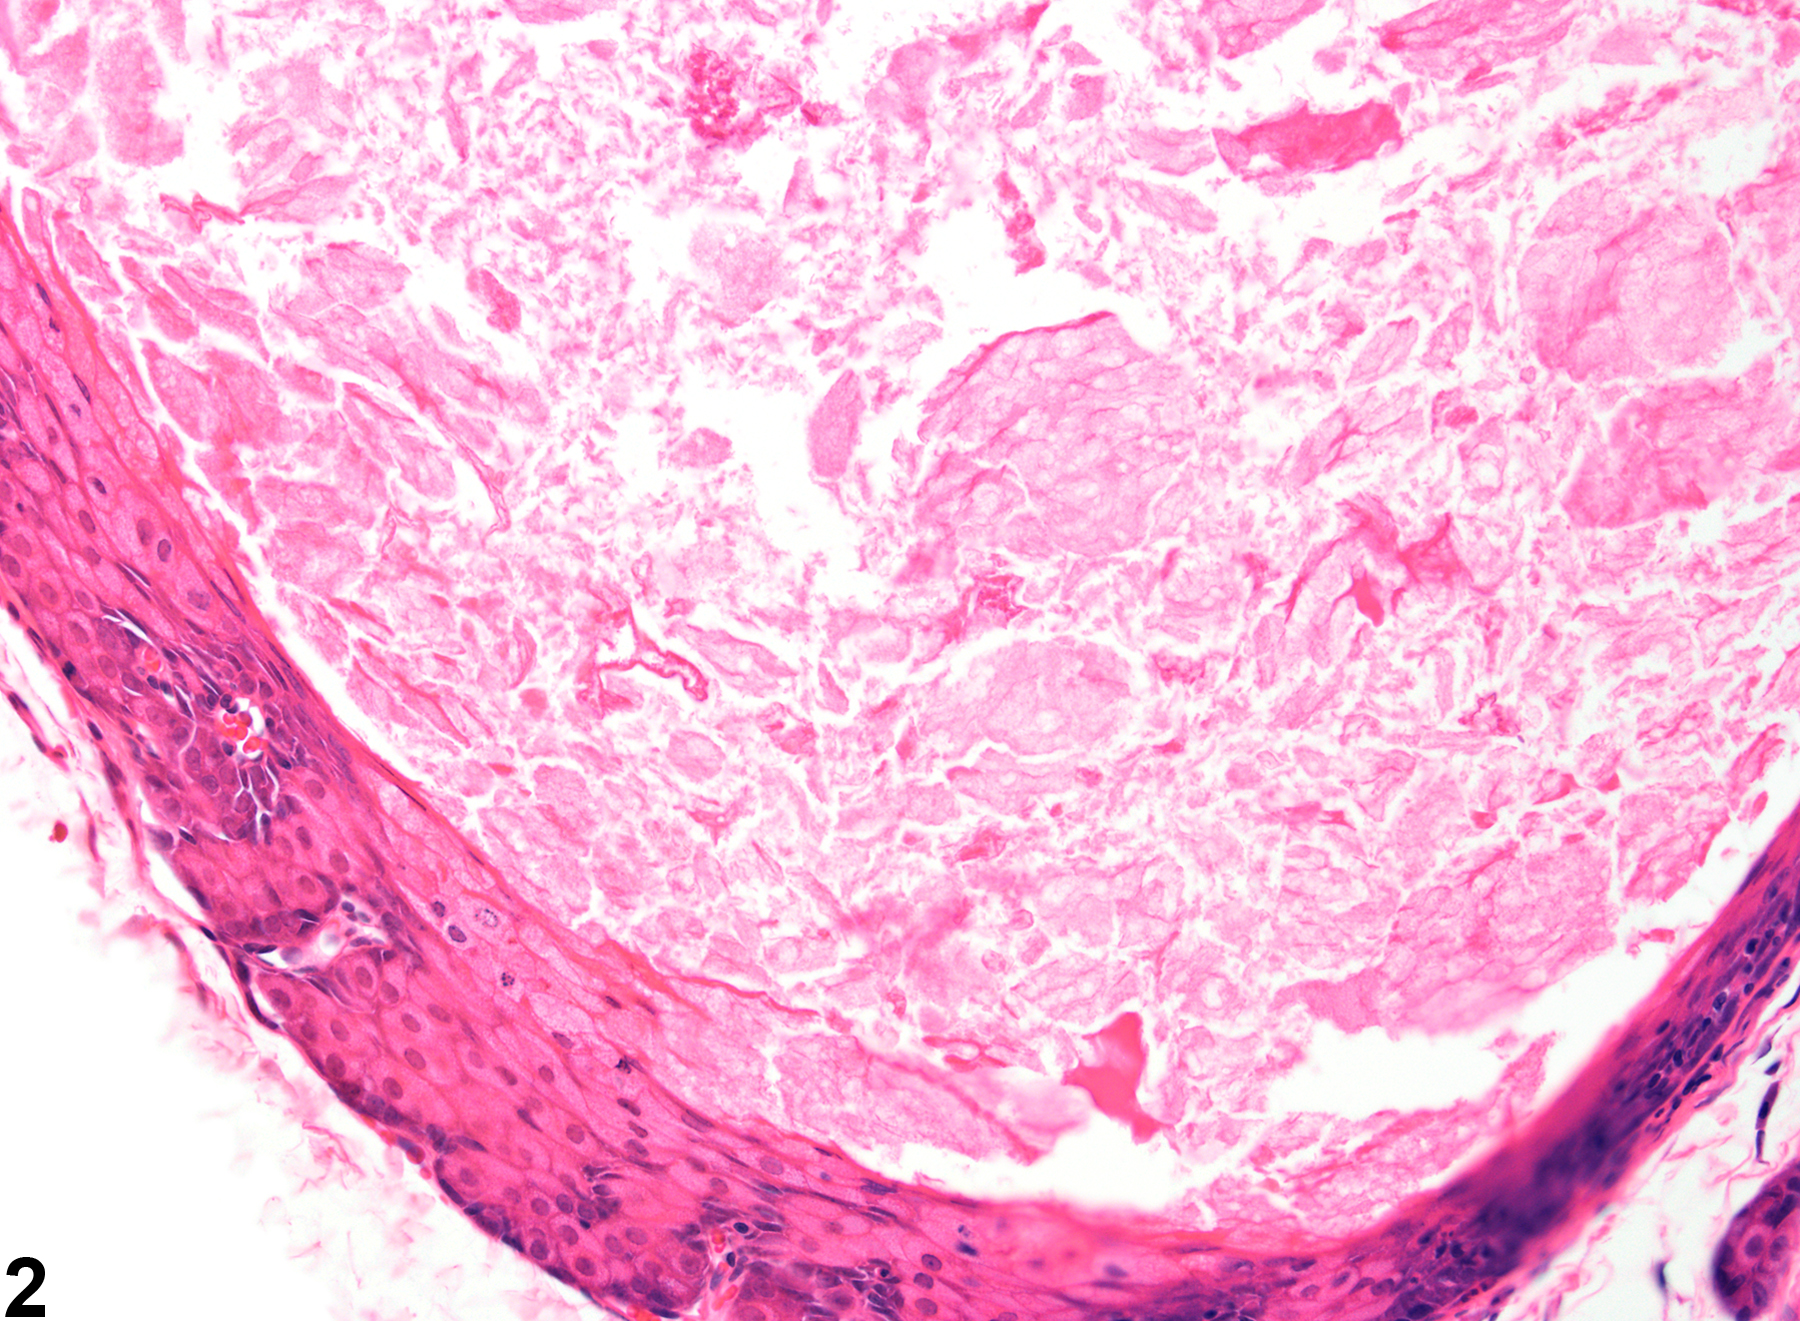 Image of duct cyst in the Zymbal's gland from a female F344/N rat in a chronic study